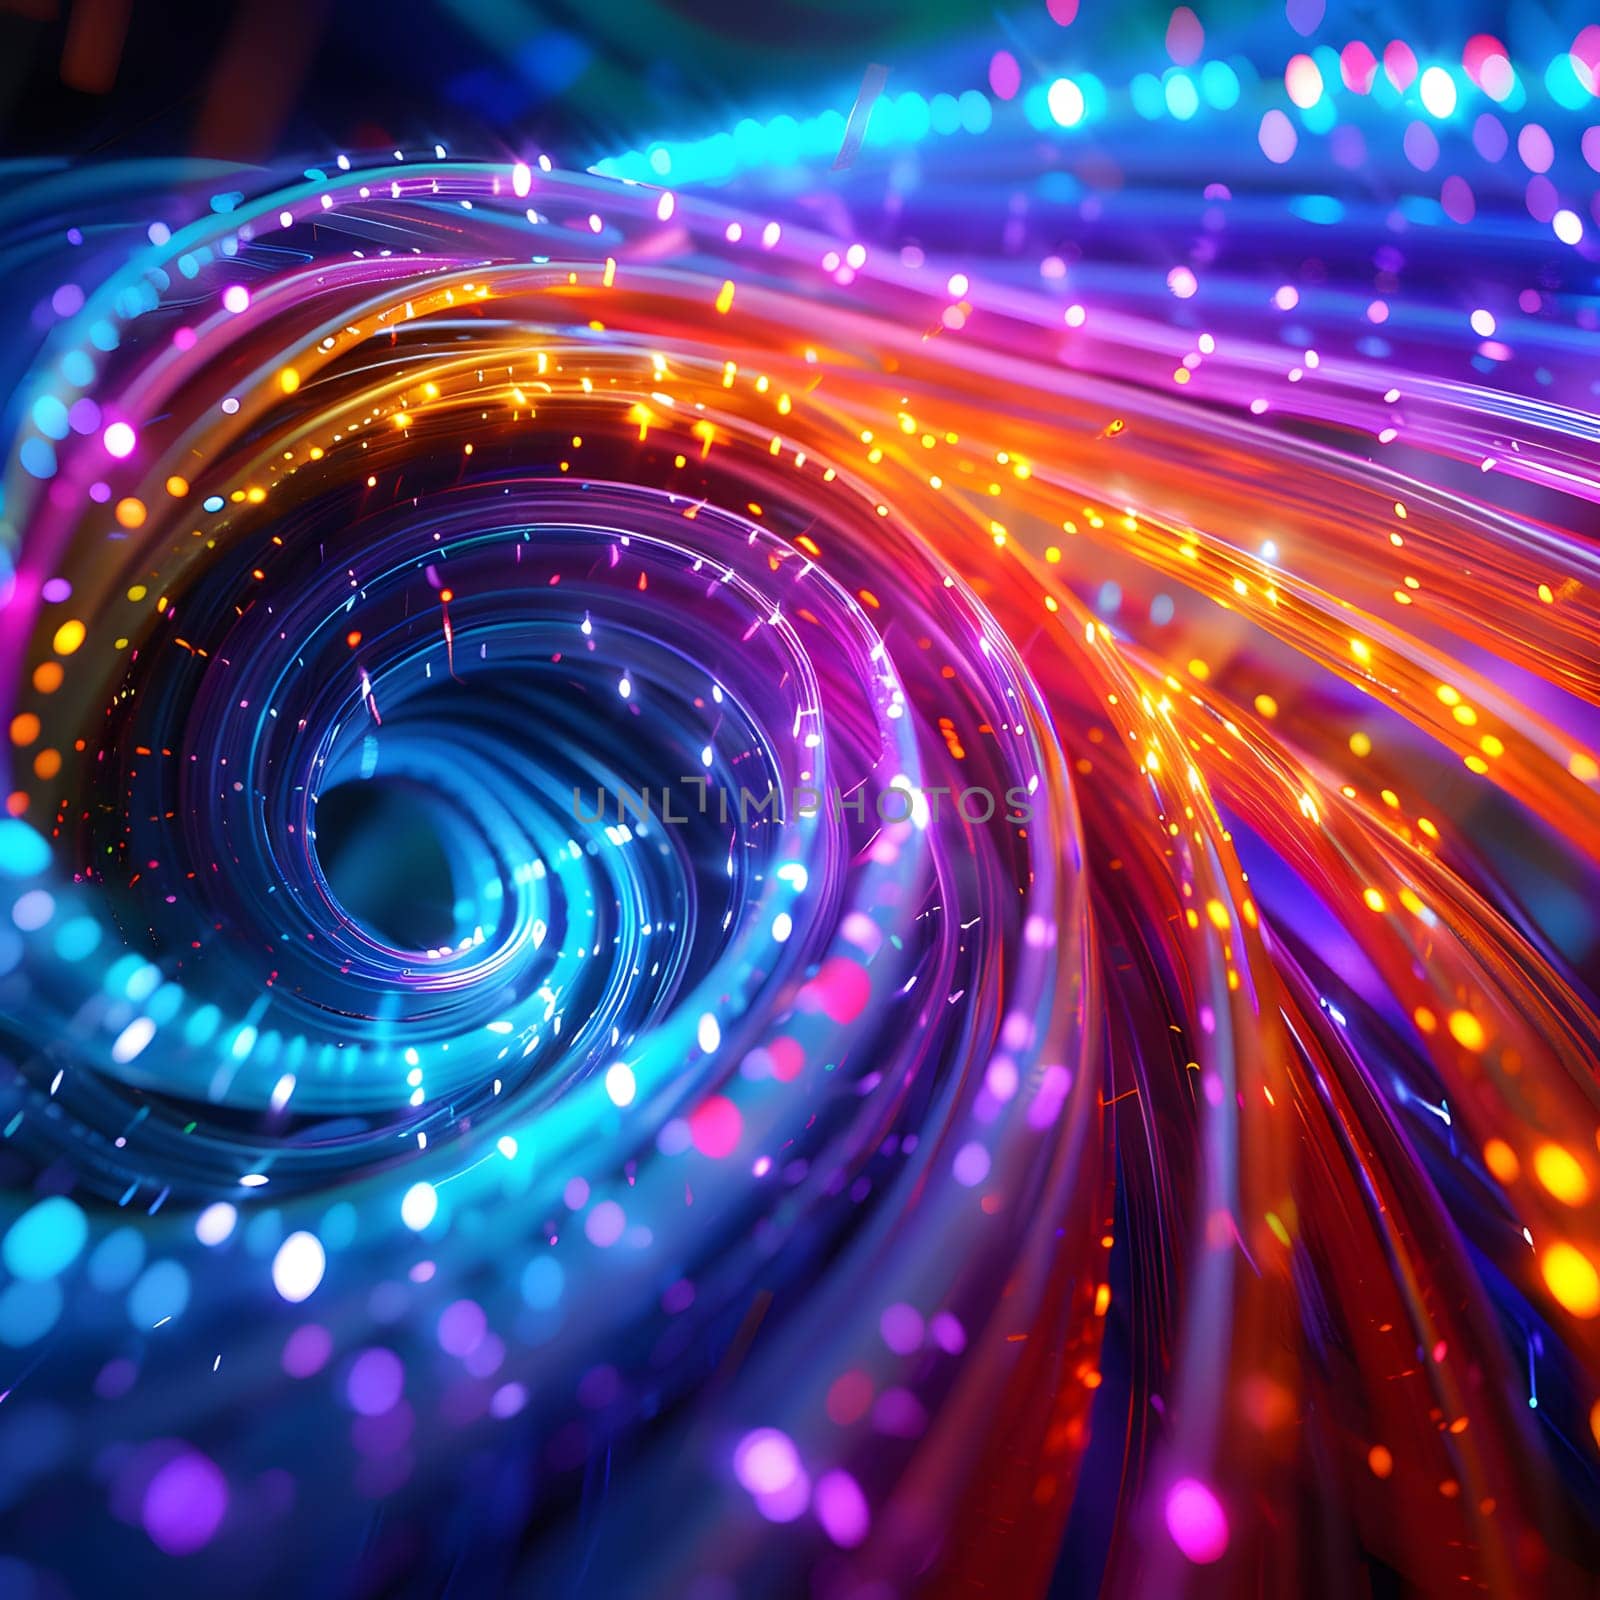 a computer generated image of a colorful swirl of lights by Nadtochiy